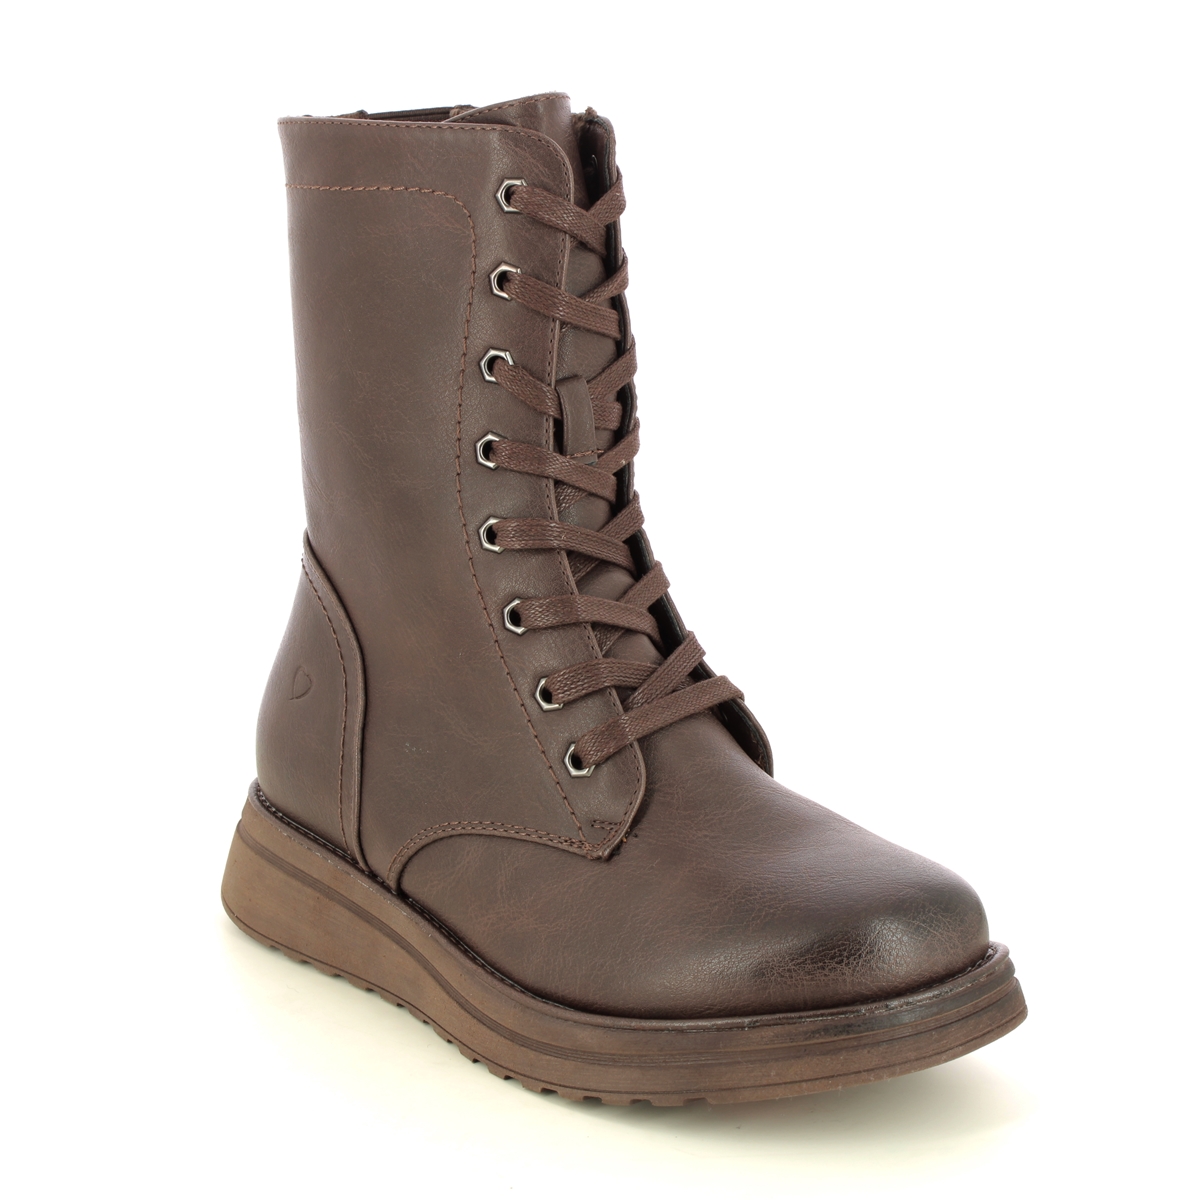 Heavenly Feet Martina Walker Chocolate Brown Womens Lace Up Boots 3509-27 In Size 6 In Plain Chocolate Brown